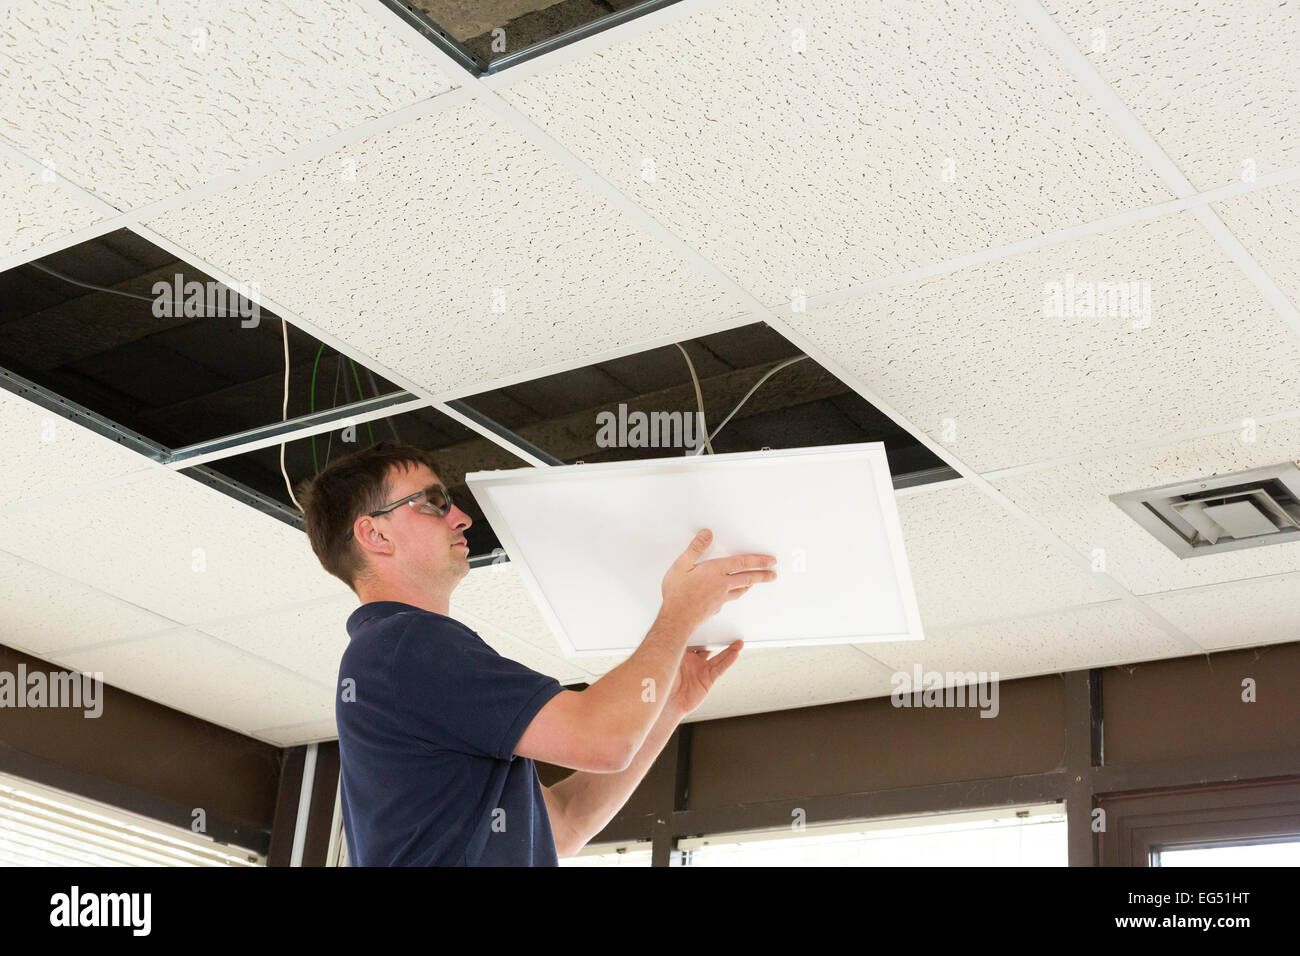 electrician installing LED flat panel lighting in a suspended ceiling Stock Photo